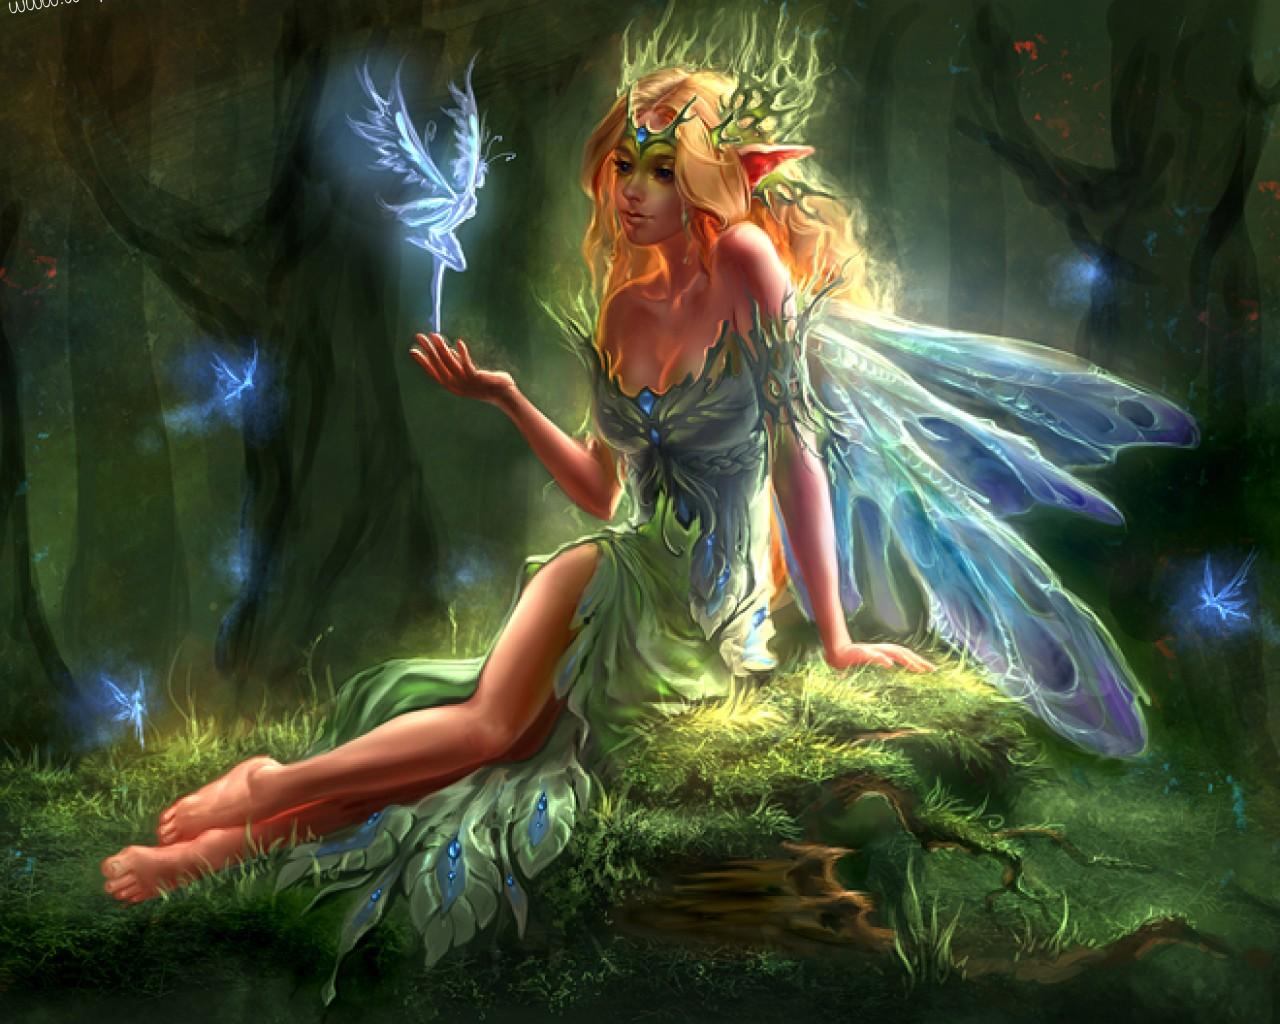 Download Forest elf and the little fairies HD wallpaper for your mobile cell phone